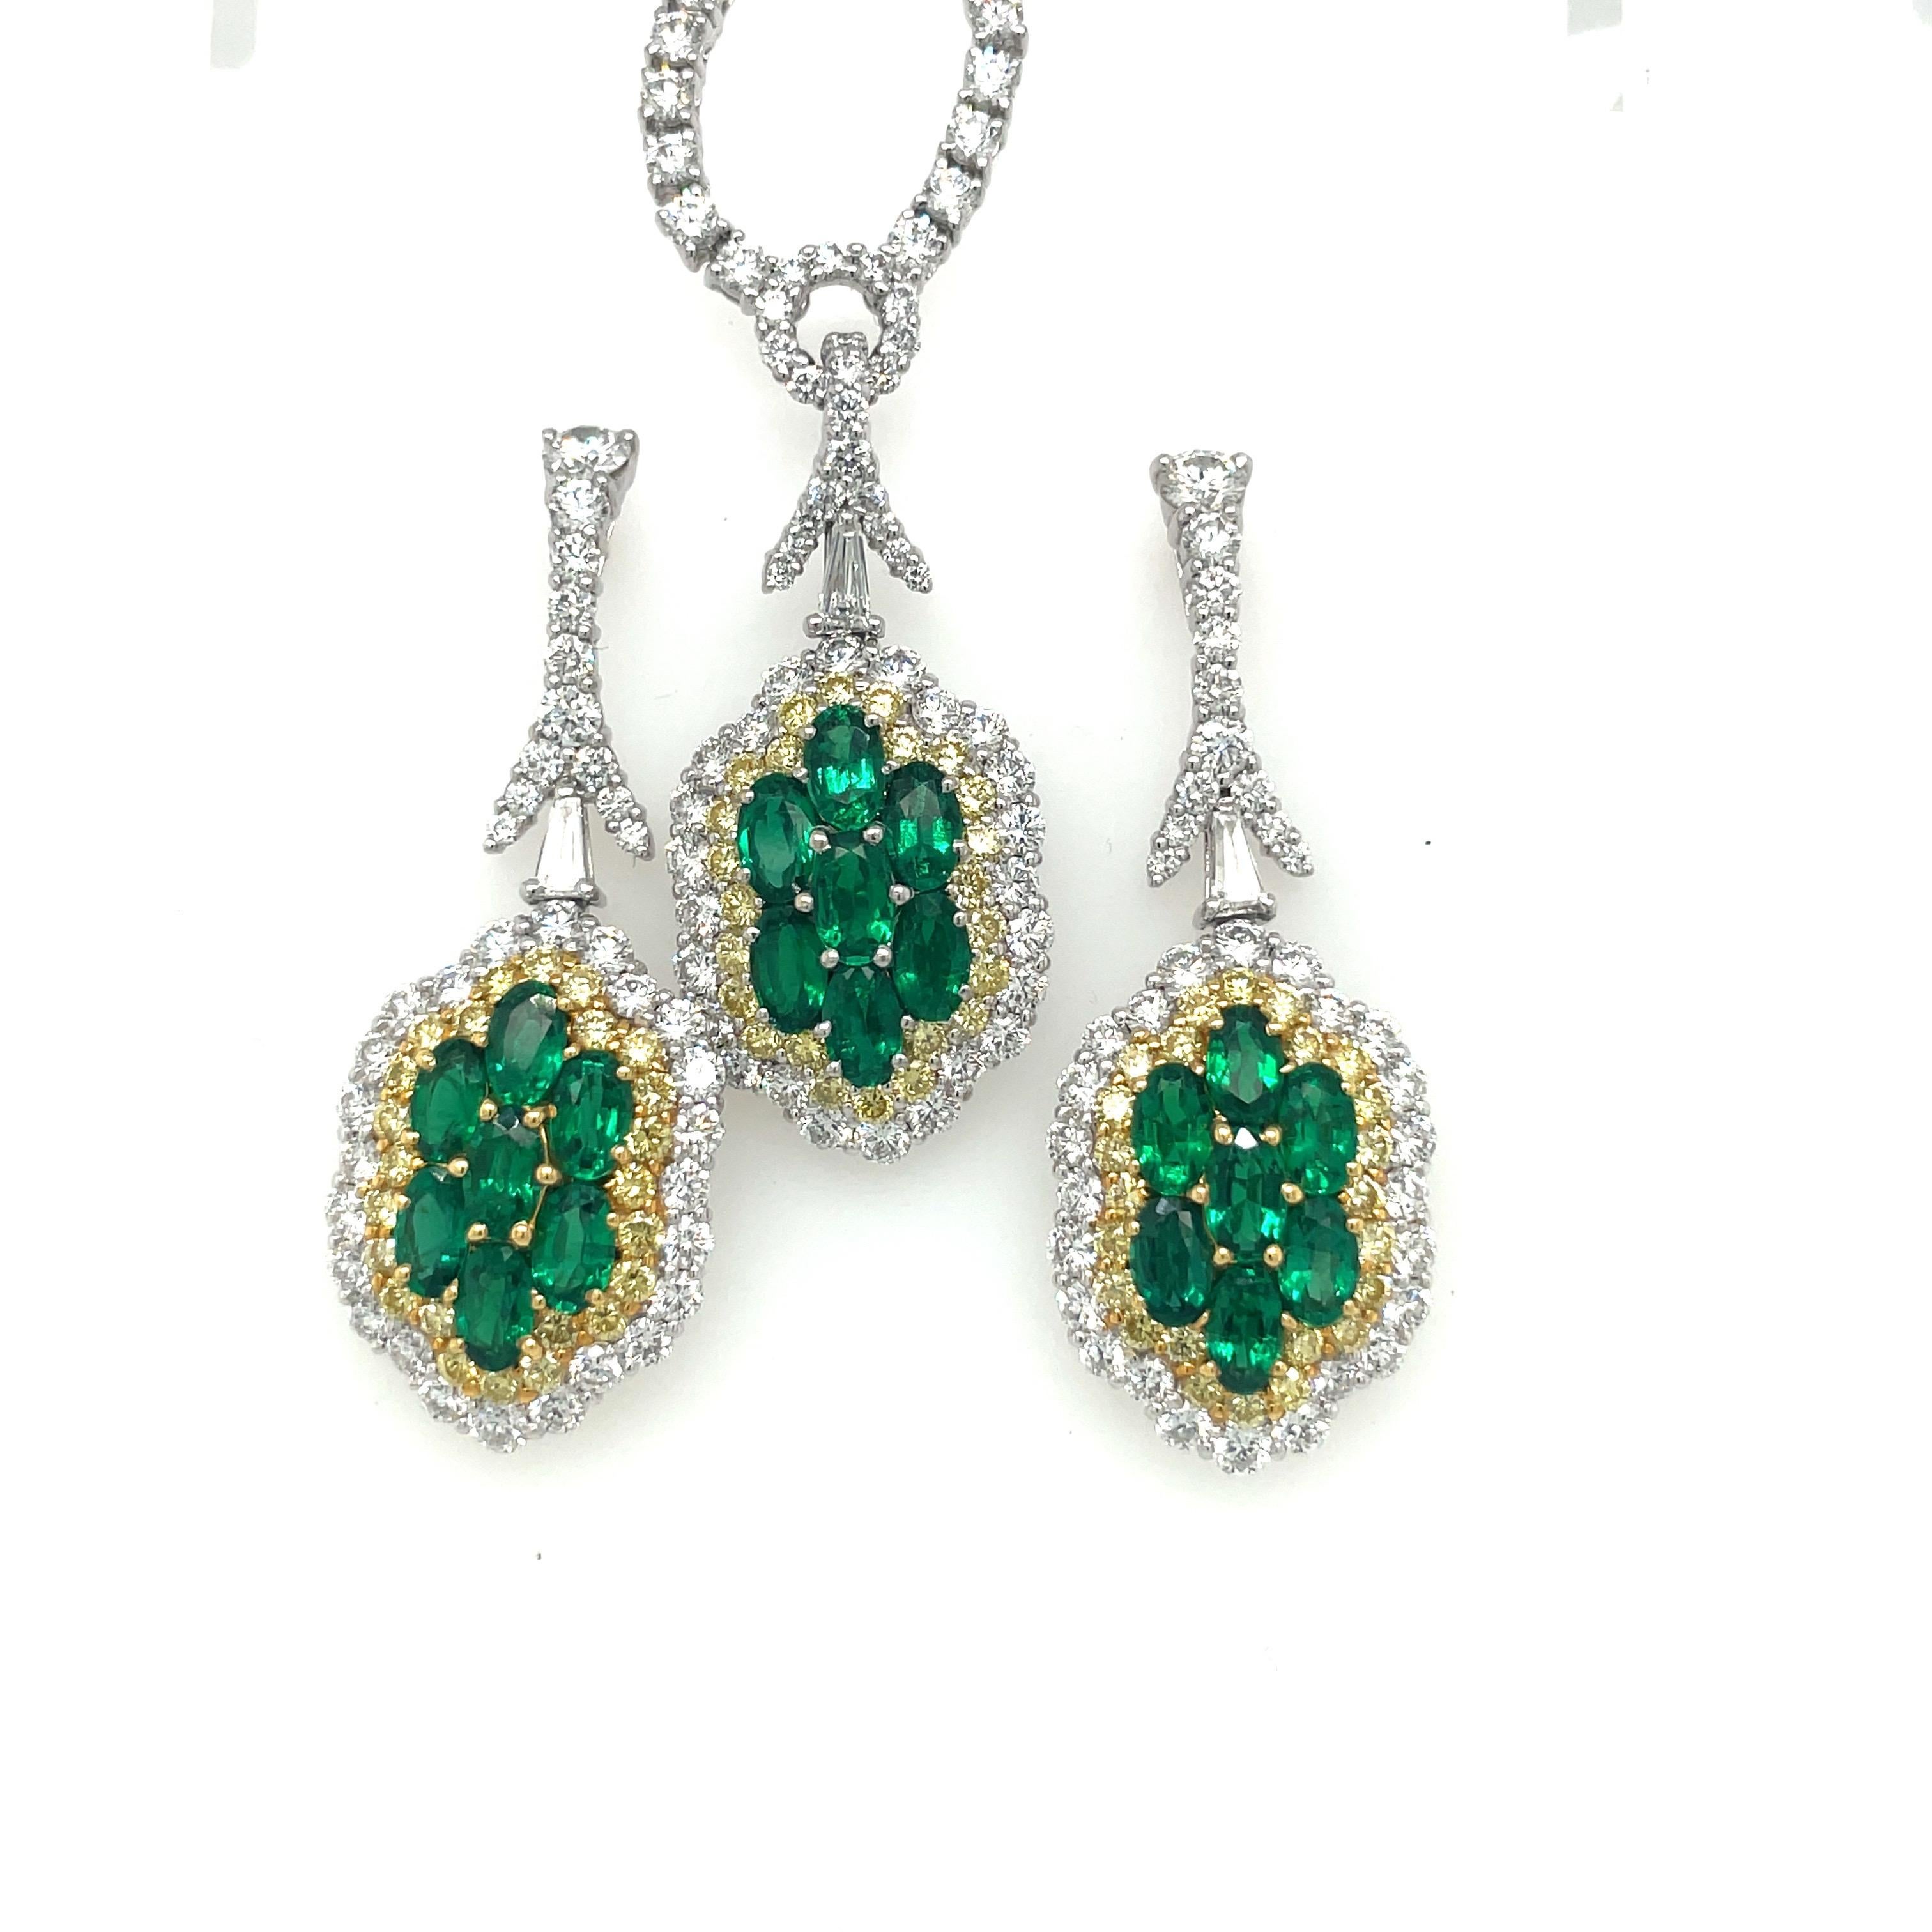 Oval Cut Plat/18KT YG 3.00Ct Emerald Earrings with 2.66Ct Diamonds 1.07Ct Yellow Diamonds For Sale